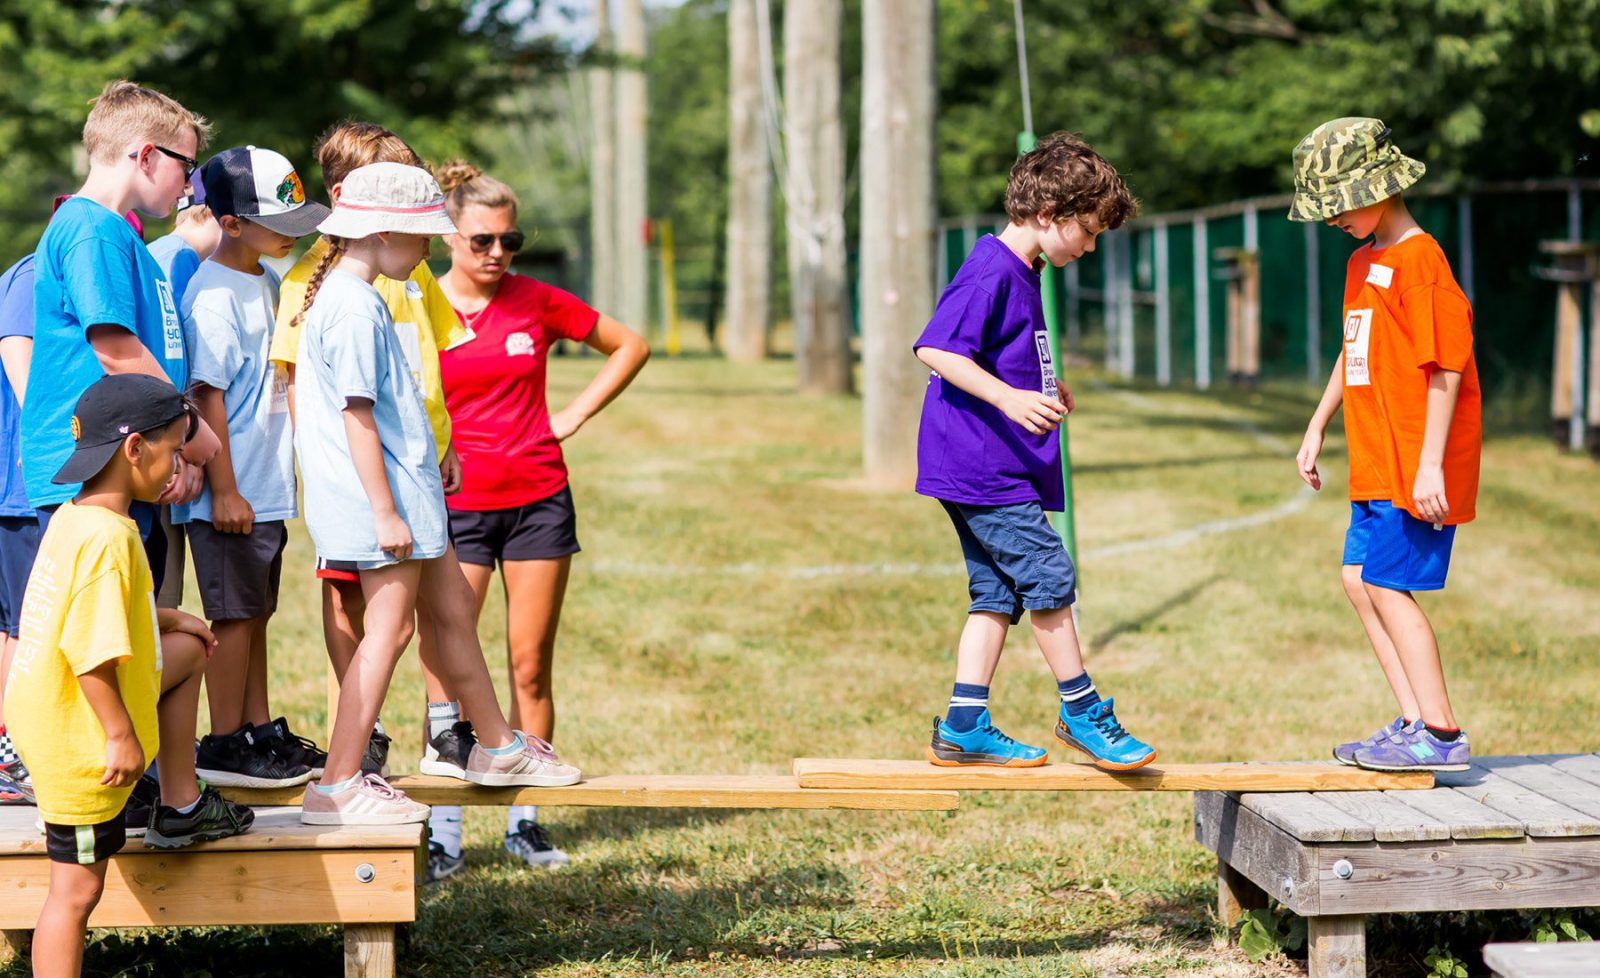 Children walk across a shallow wooden plank during a learning exercise outdoors.